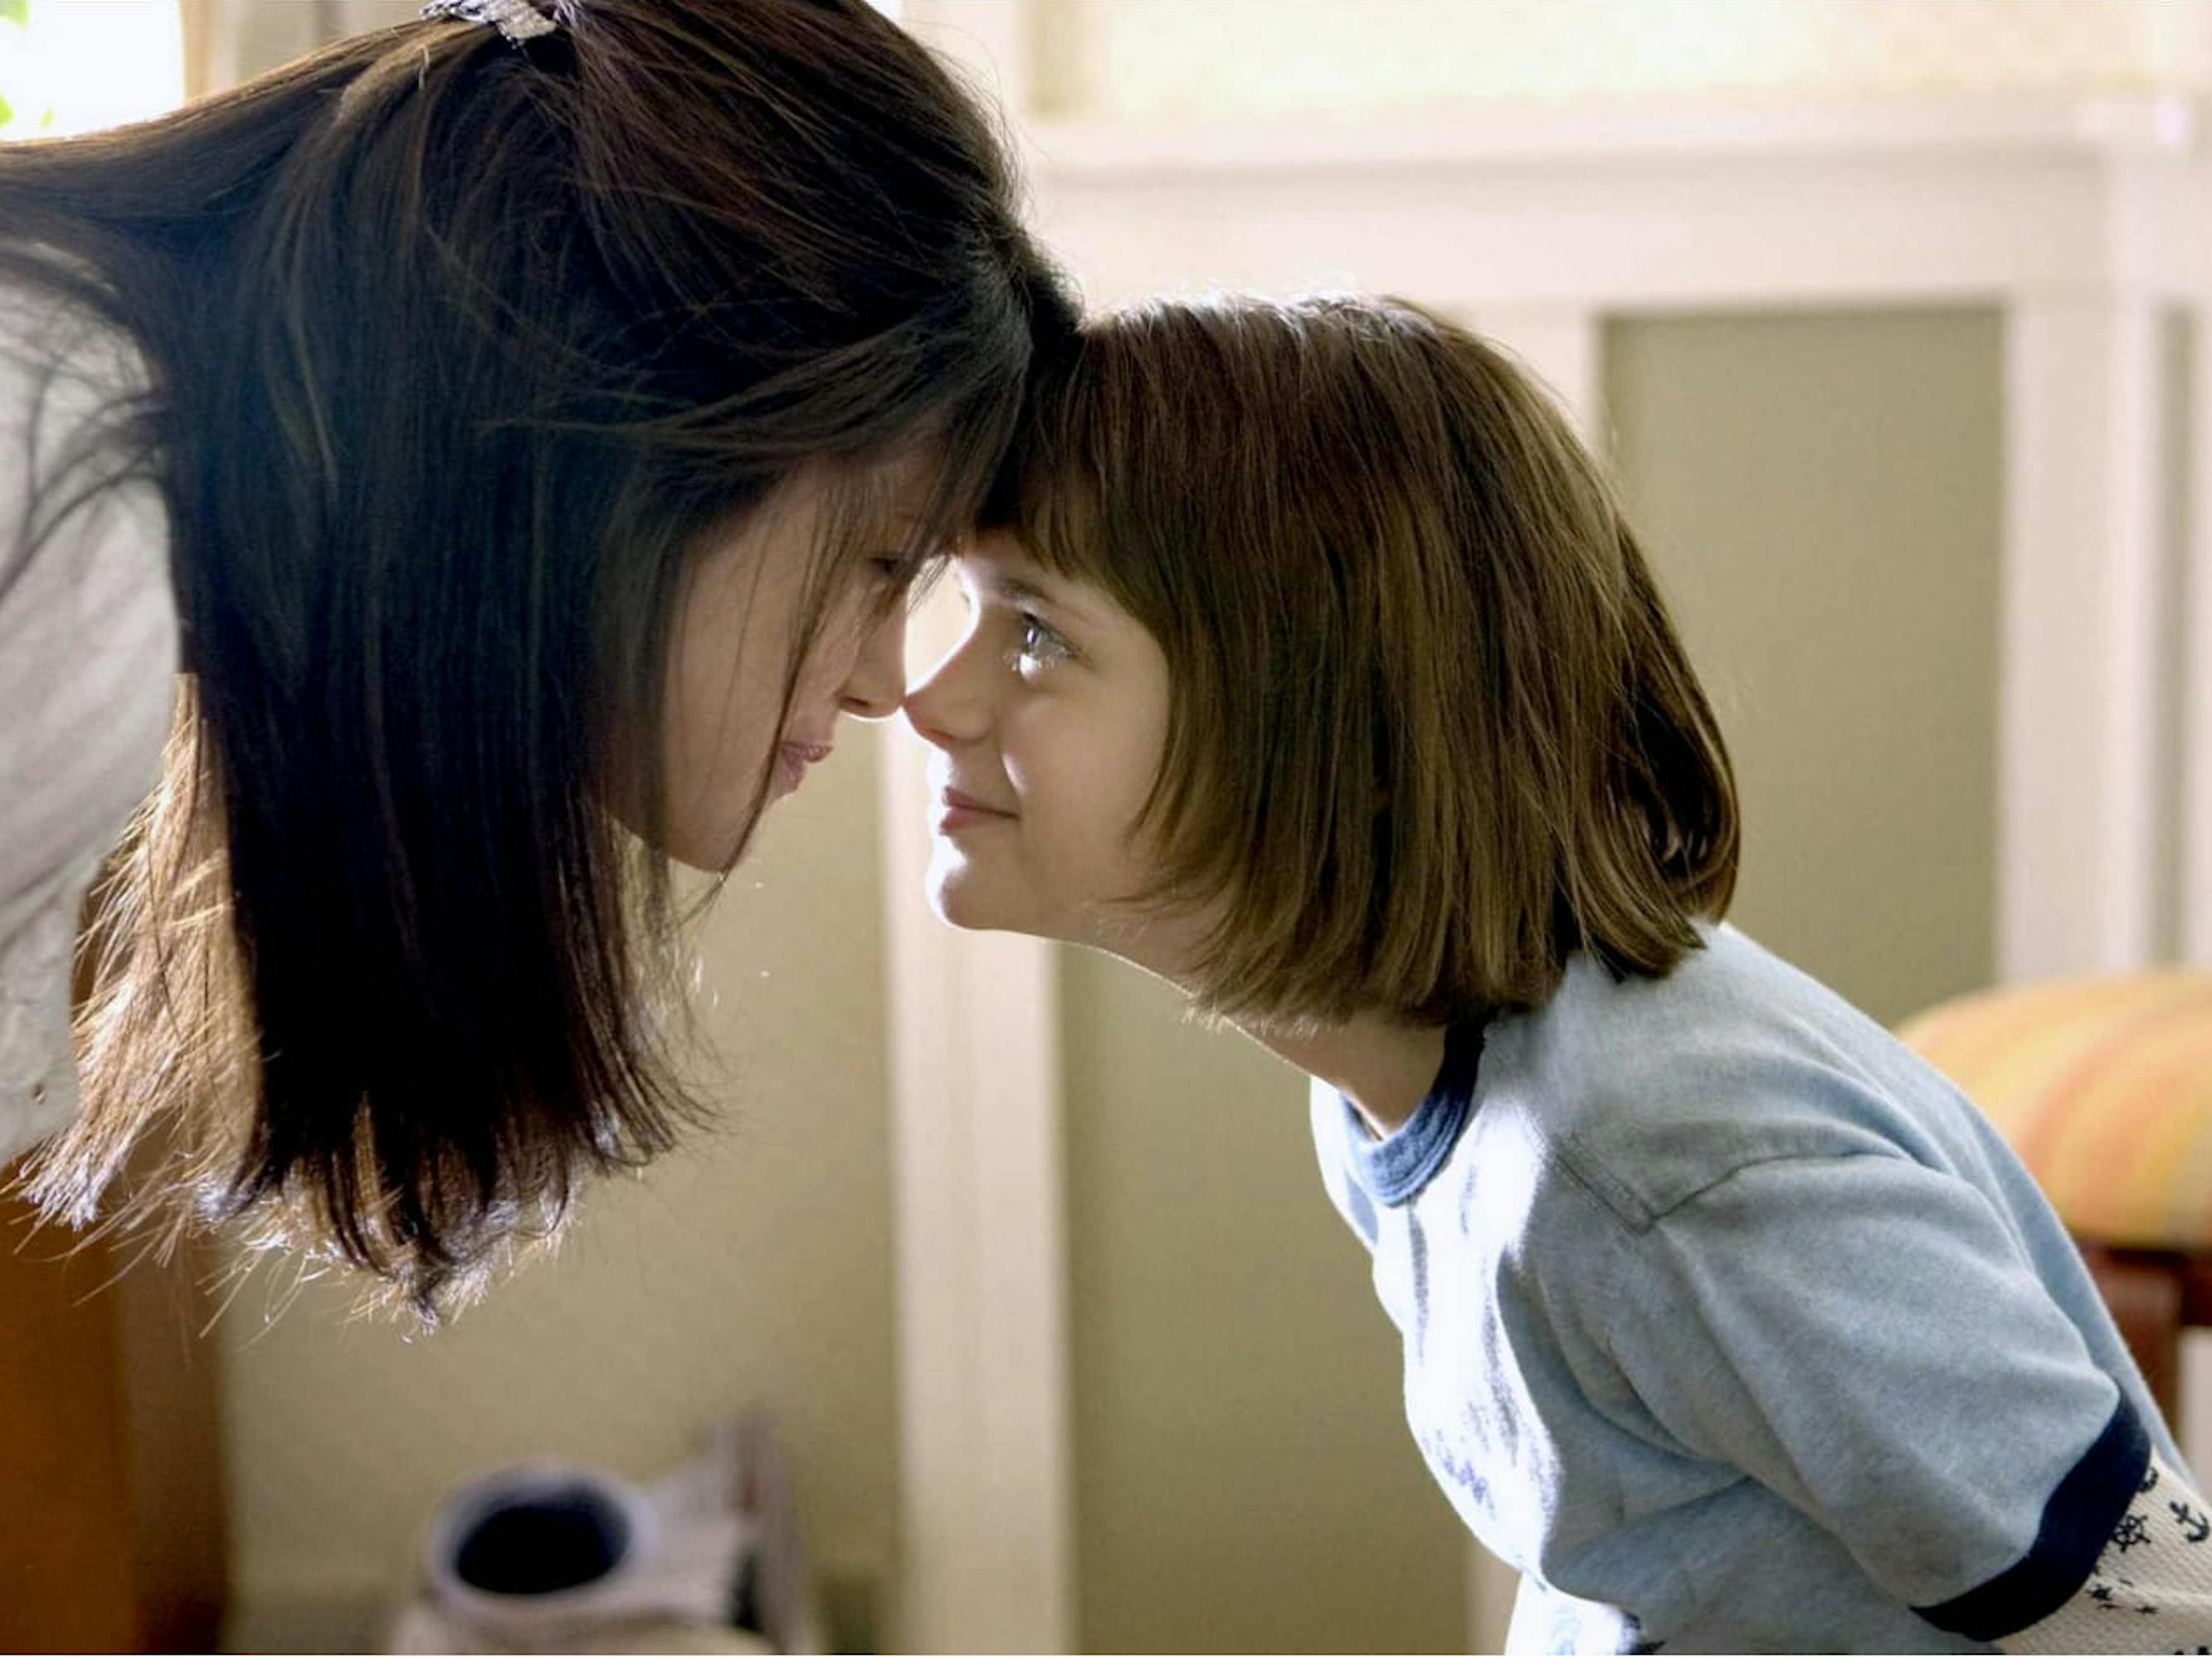 Beezus Quimby (Selena Gomez) and Ramona Quimby (Joey King) in Ramona and Beezus (2010). They go head to head, with their foreheads pressed against each other.